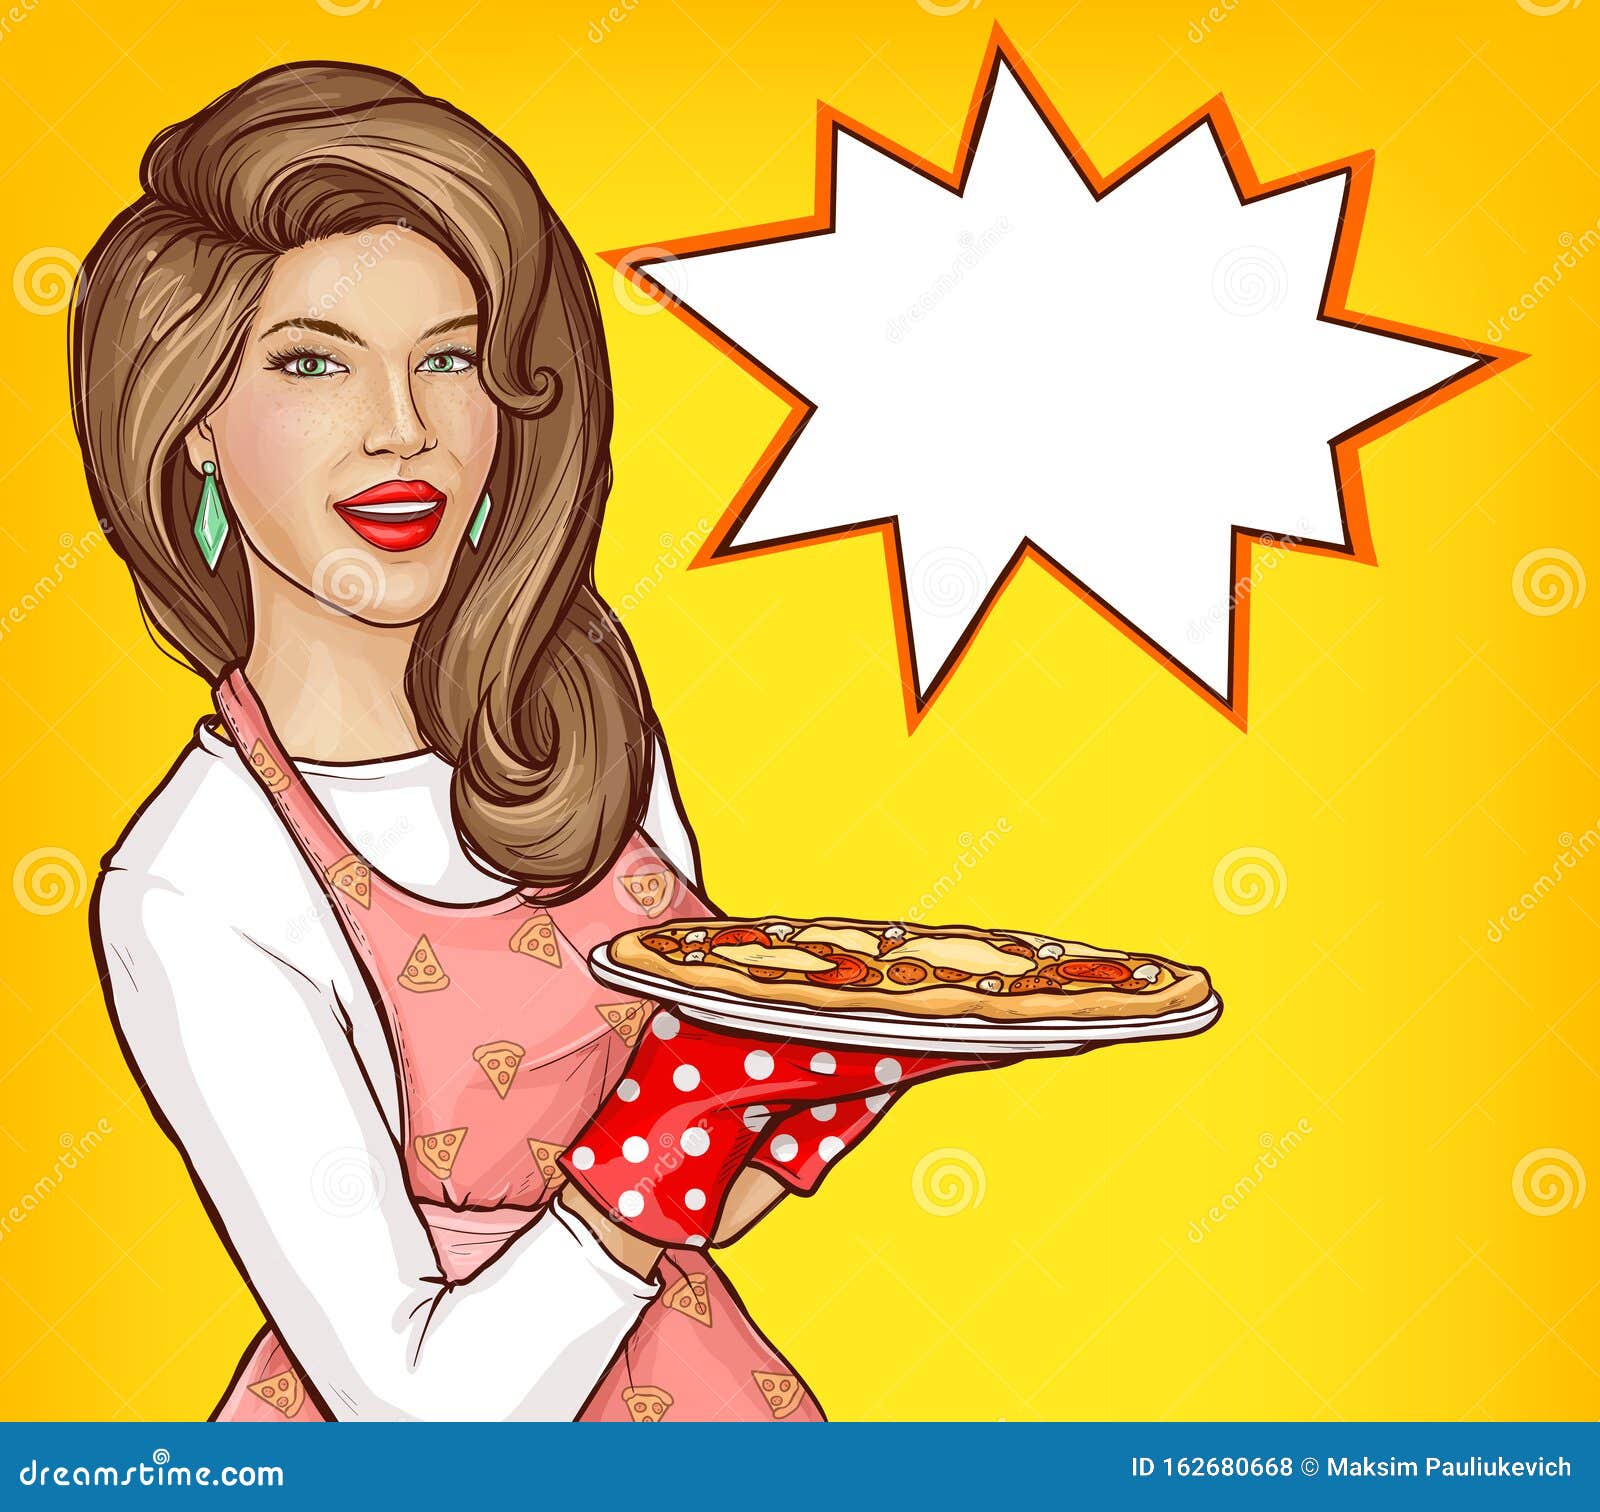 Pop Art Woman Holding Tray with Pizza for Family Stock Vector ...